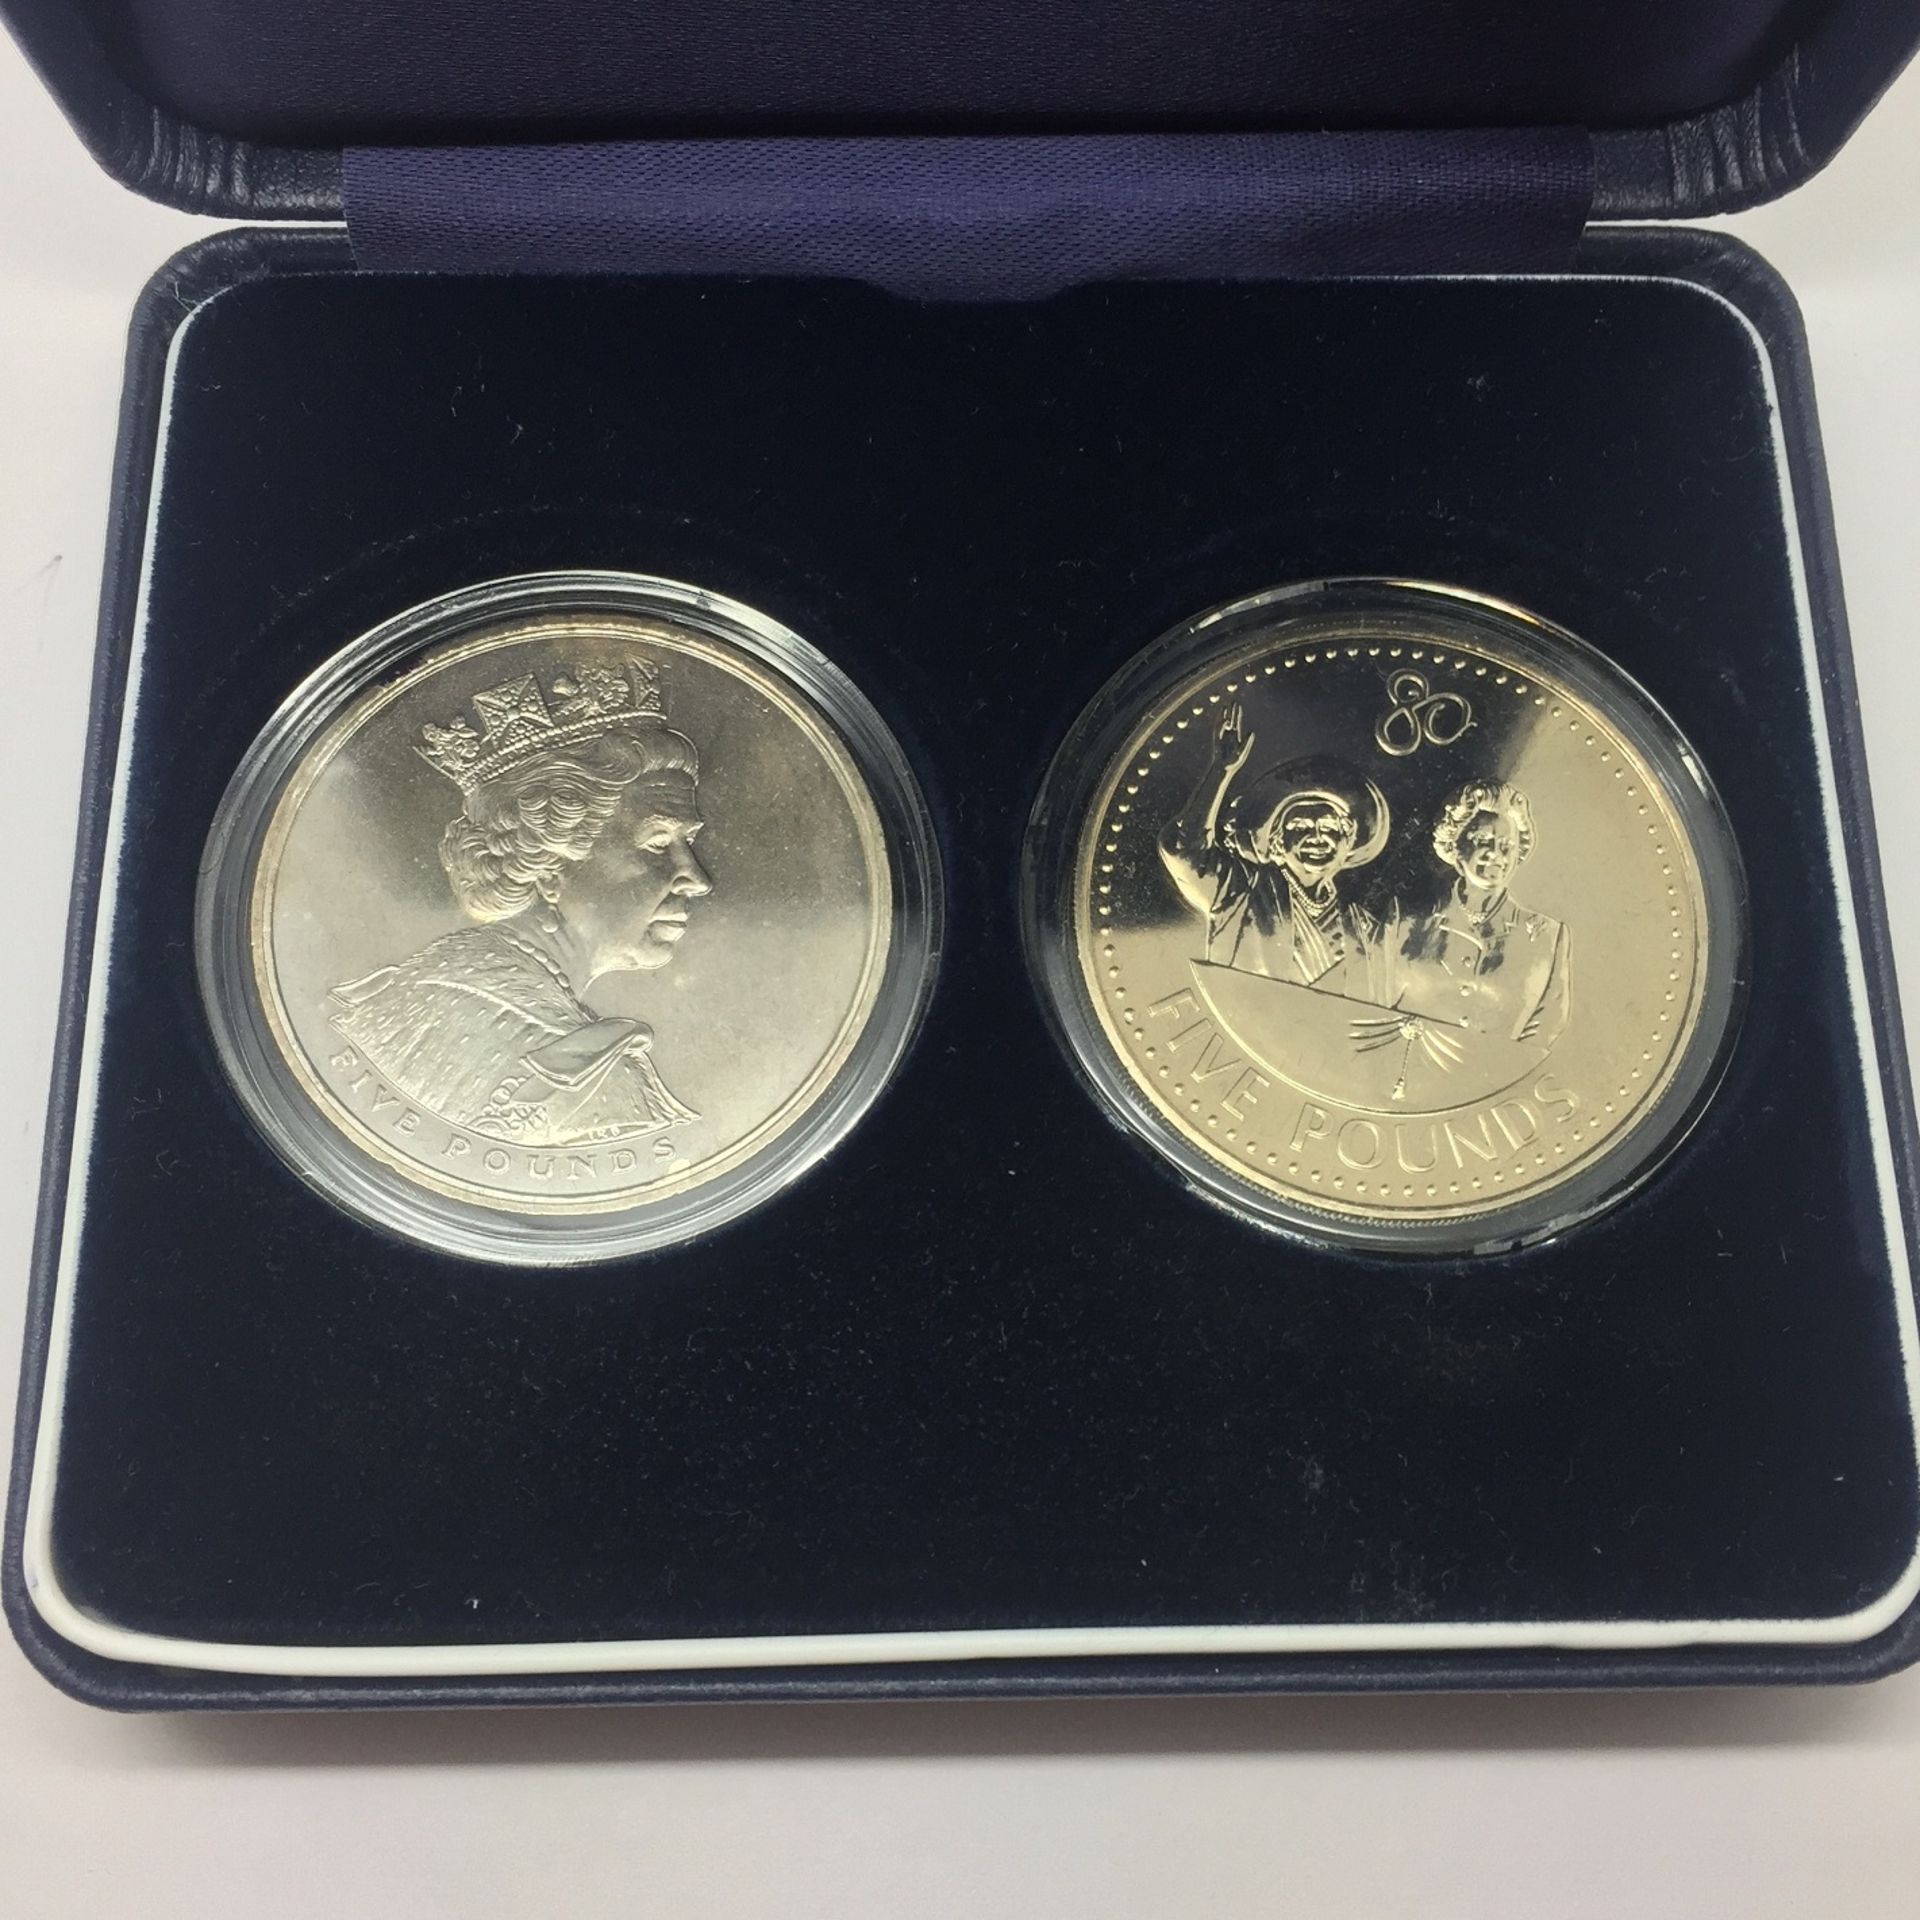 2 Boxed Five Pound Coins Celebrating The Queens 80th Birthday - Image 2 of 3